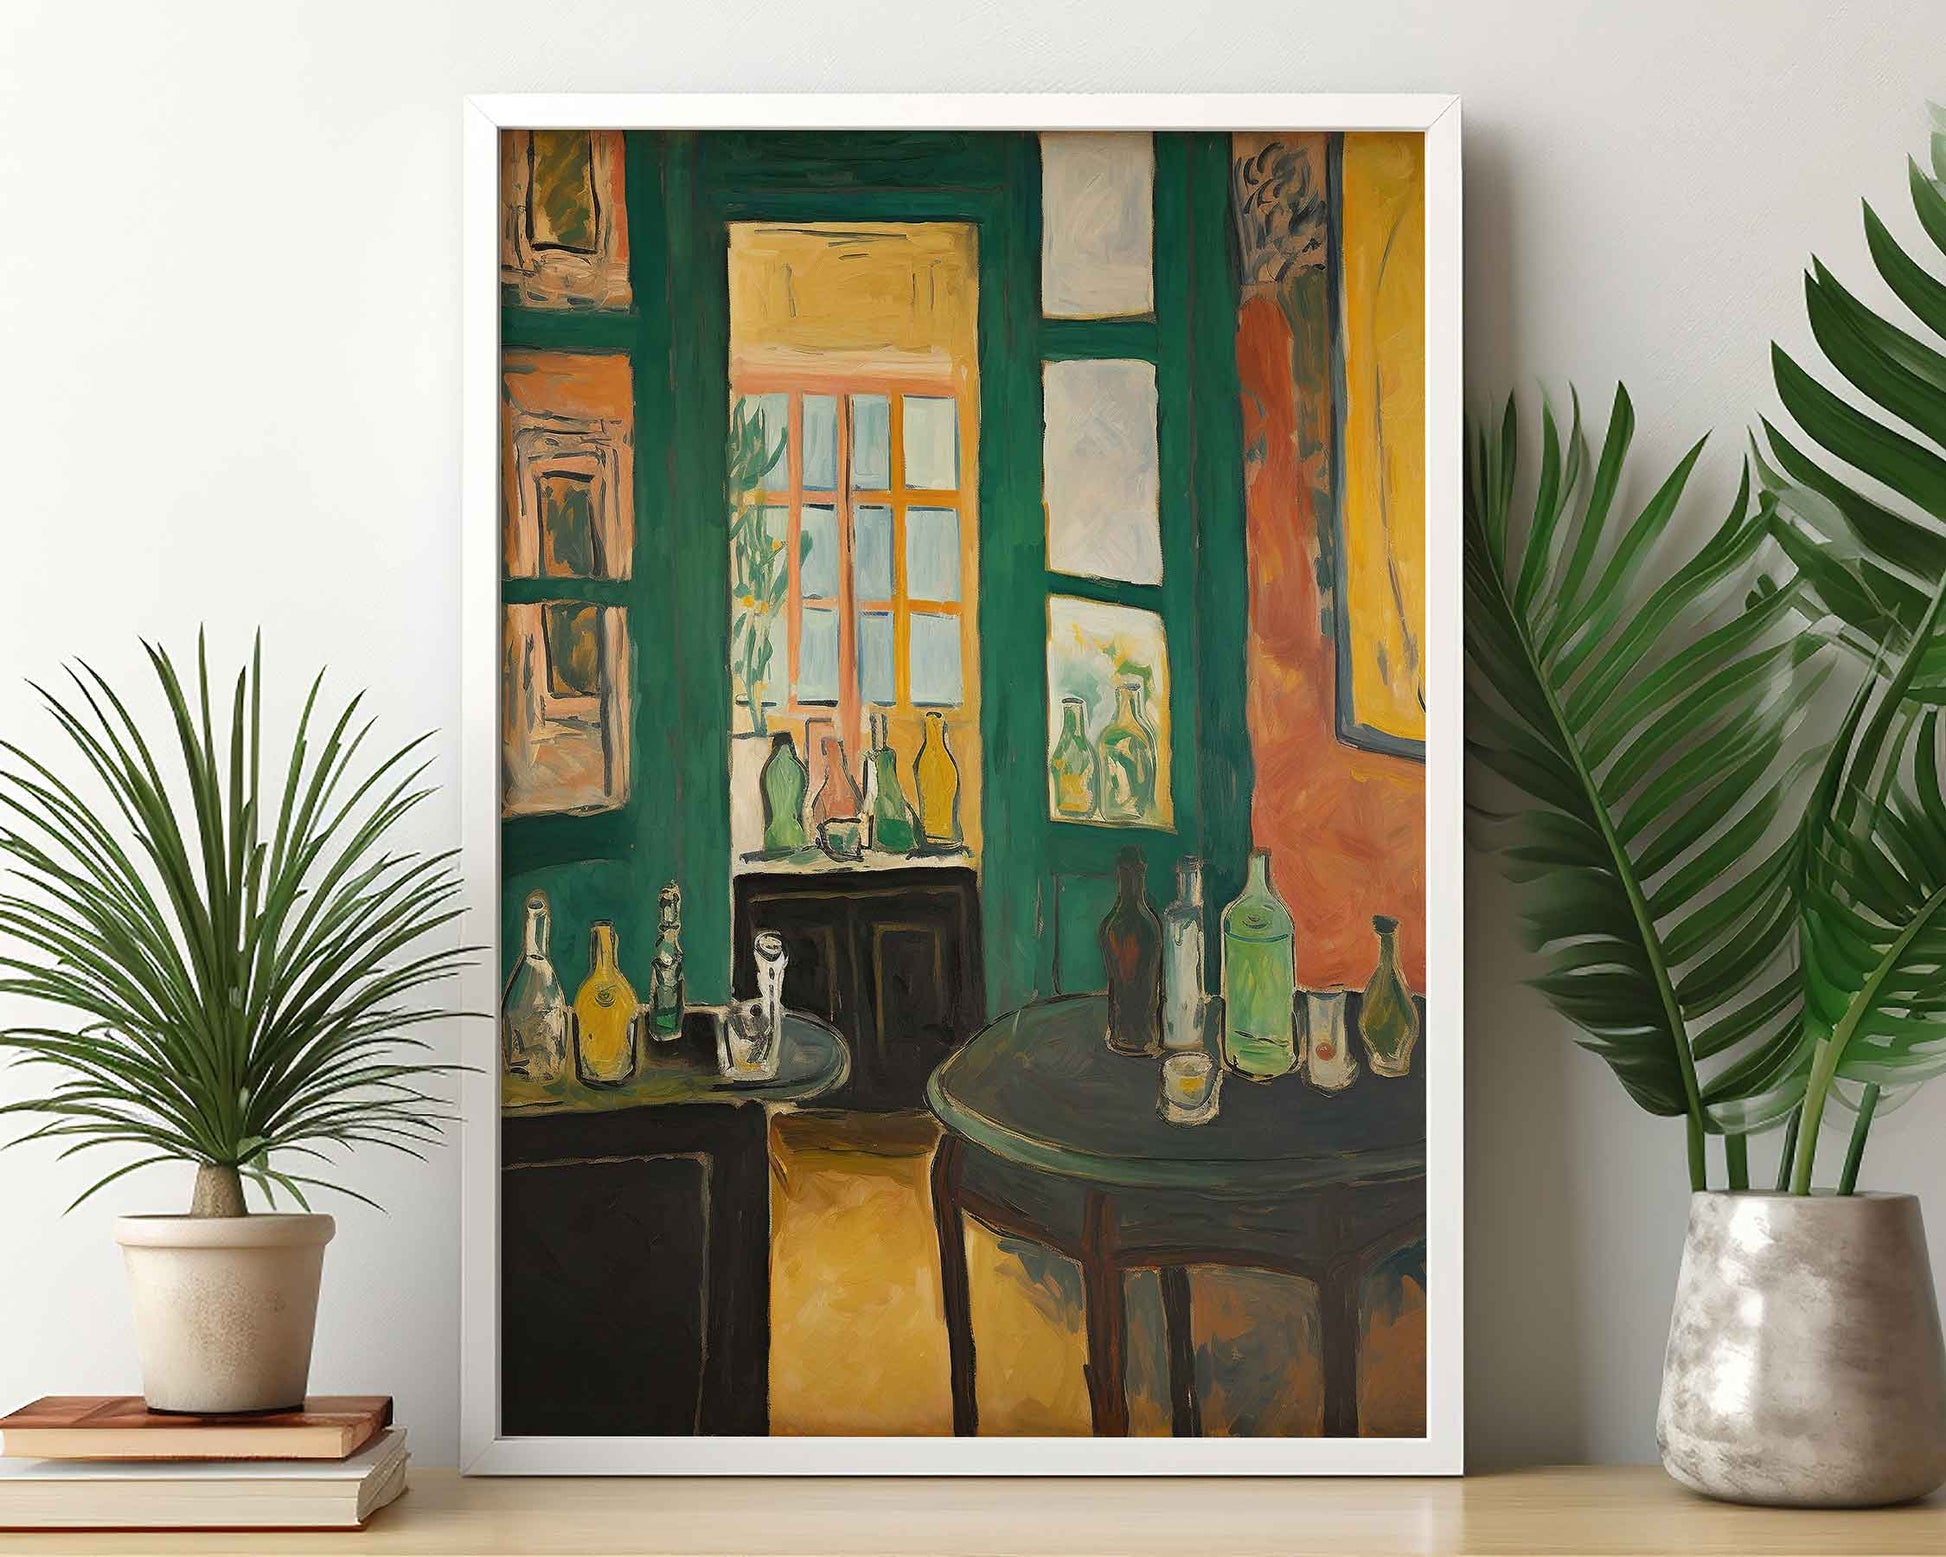 Framed Image of Matisse Style Art Wall Poster Prints Garden & Window Oil Paintings